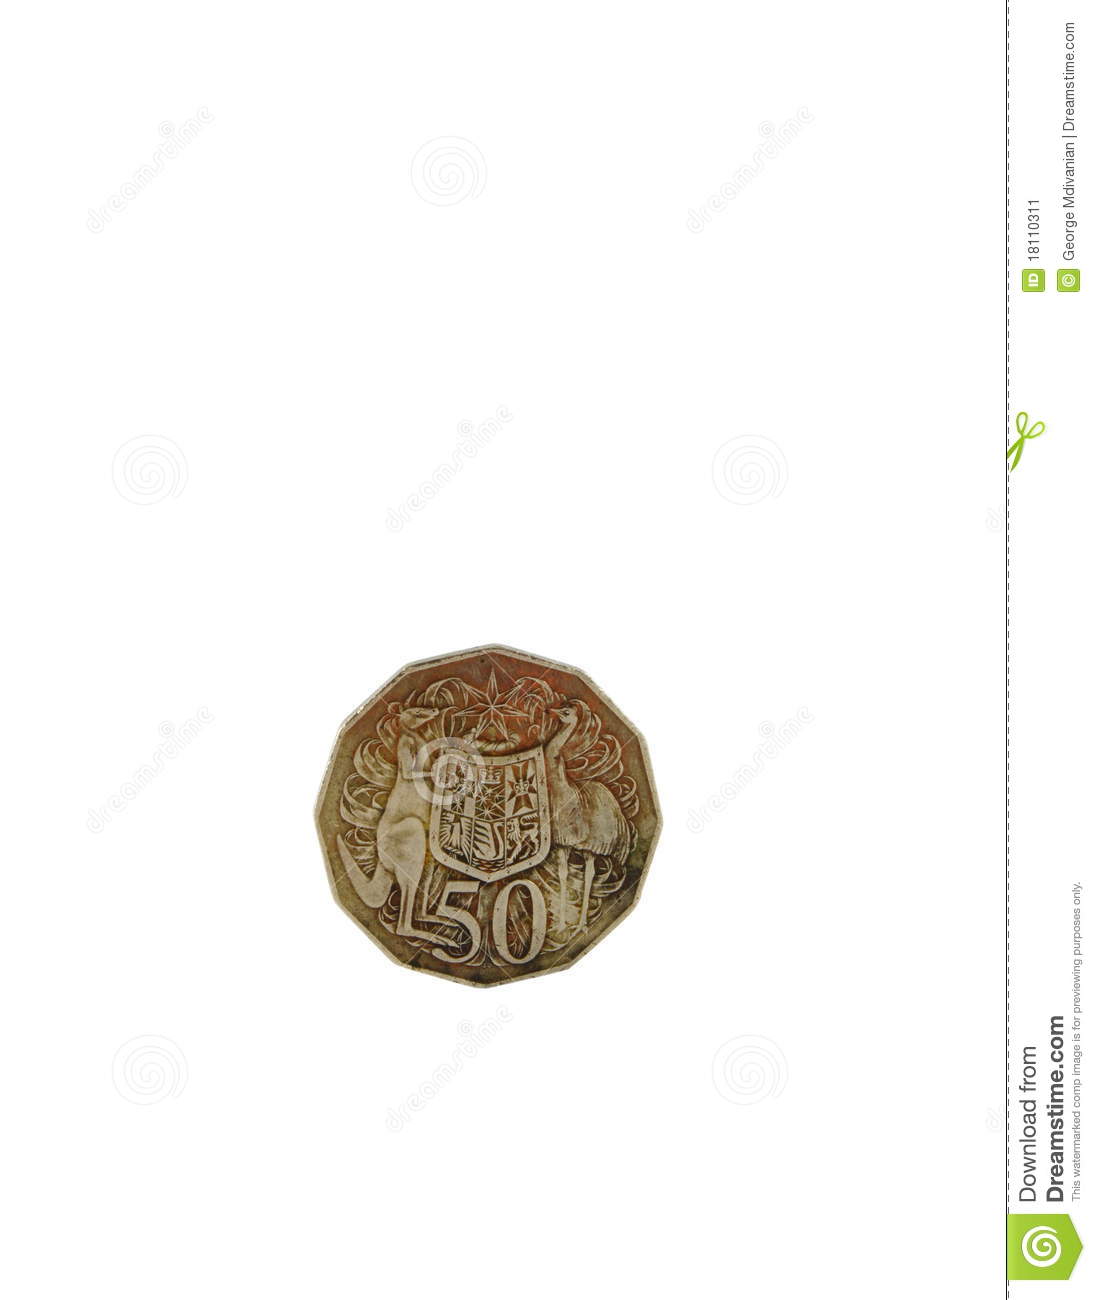 Australian Old Fifty Cent Coin With Traditional Symbols On It 